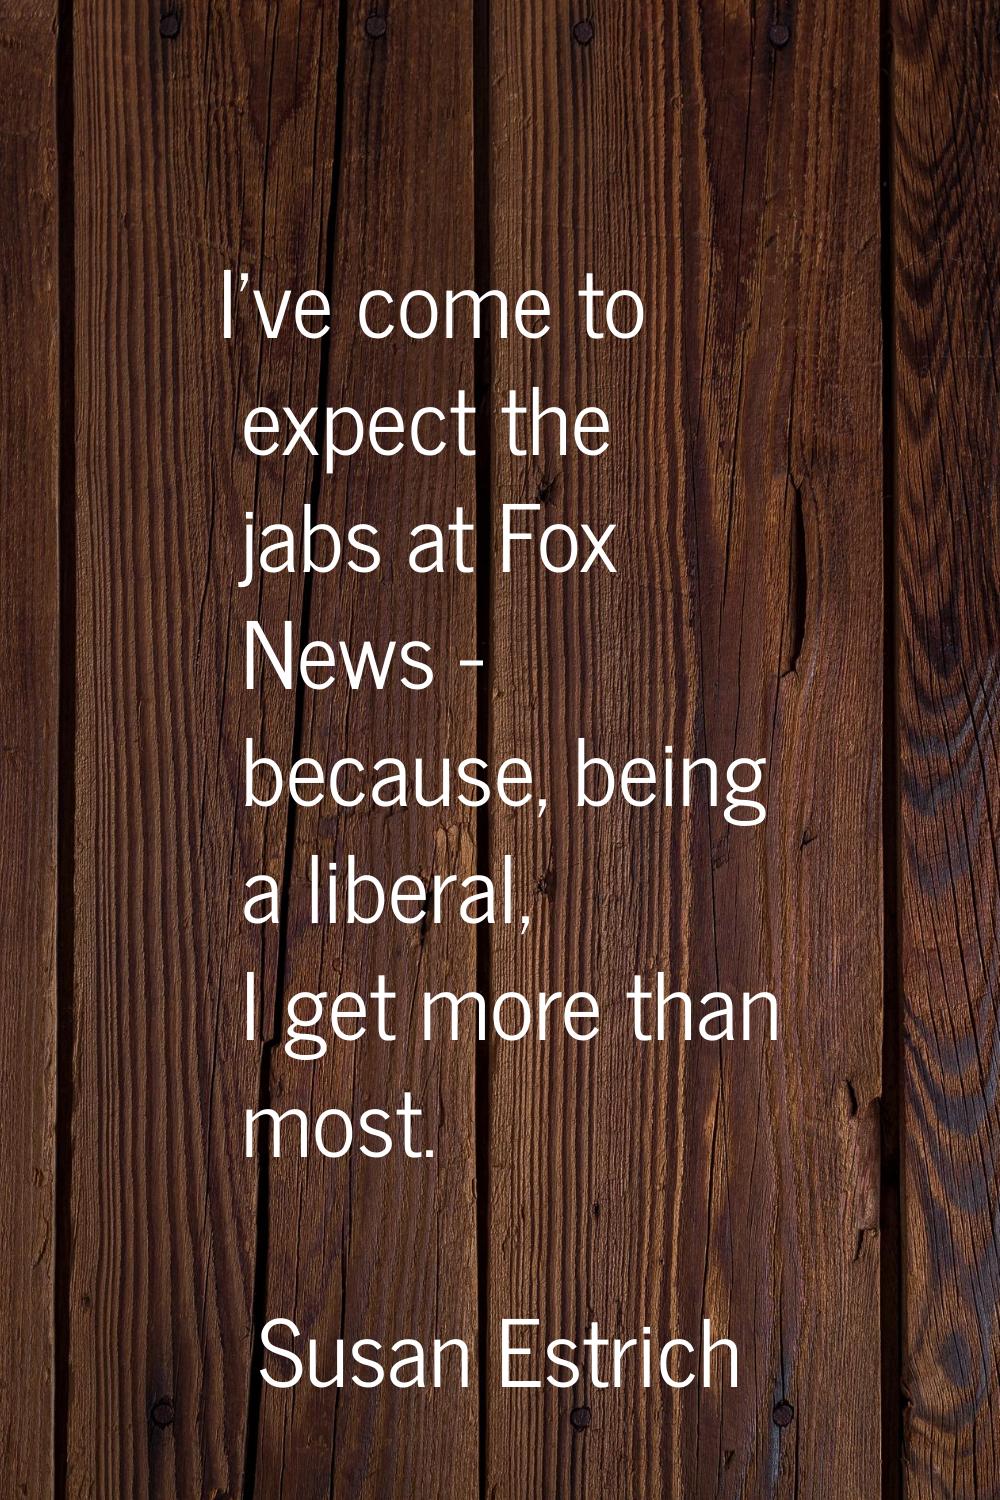 I've come to expect the jabs at Fox News - because, being a liberal, I get more than most.